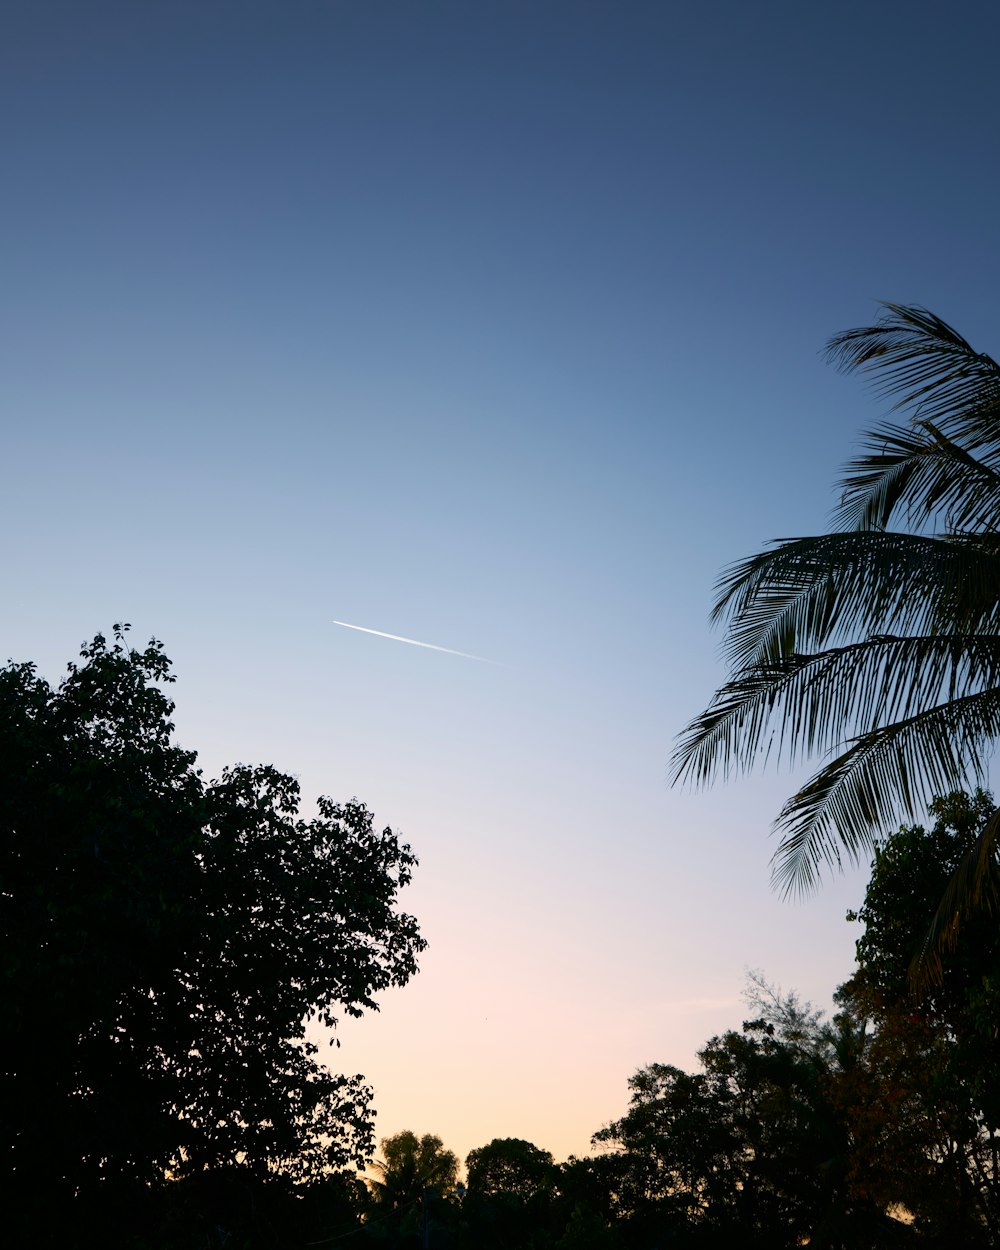 a plane is flying in the sky over trees